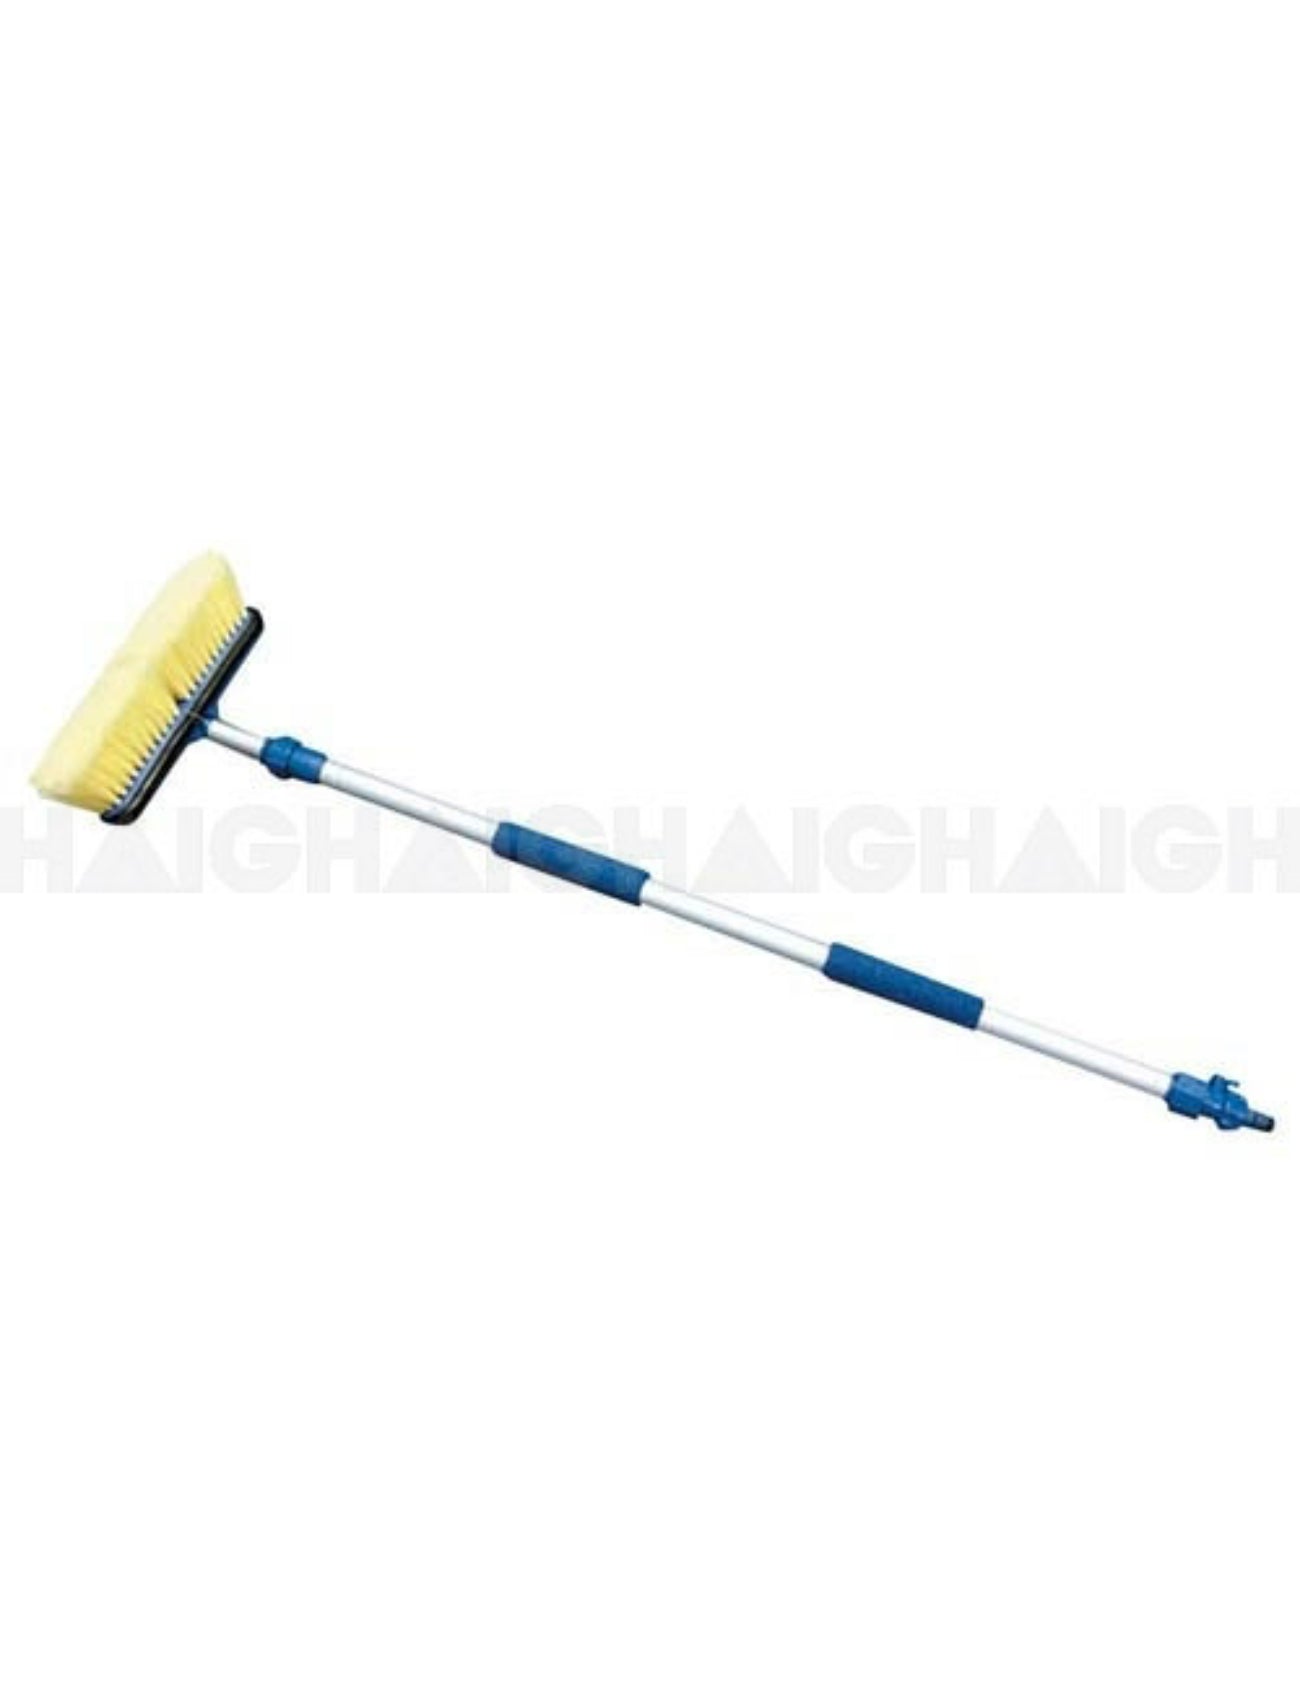 CLEANING BRUSH .9 - 1.6m W/EXT HANDLE